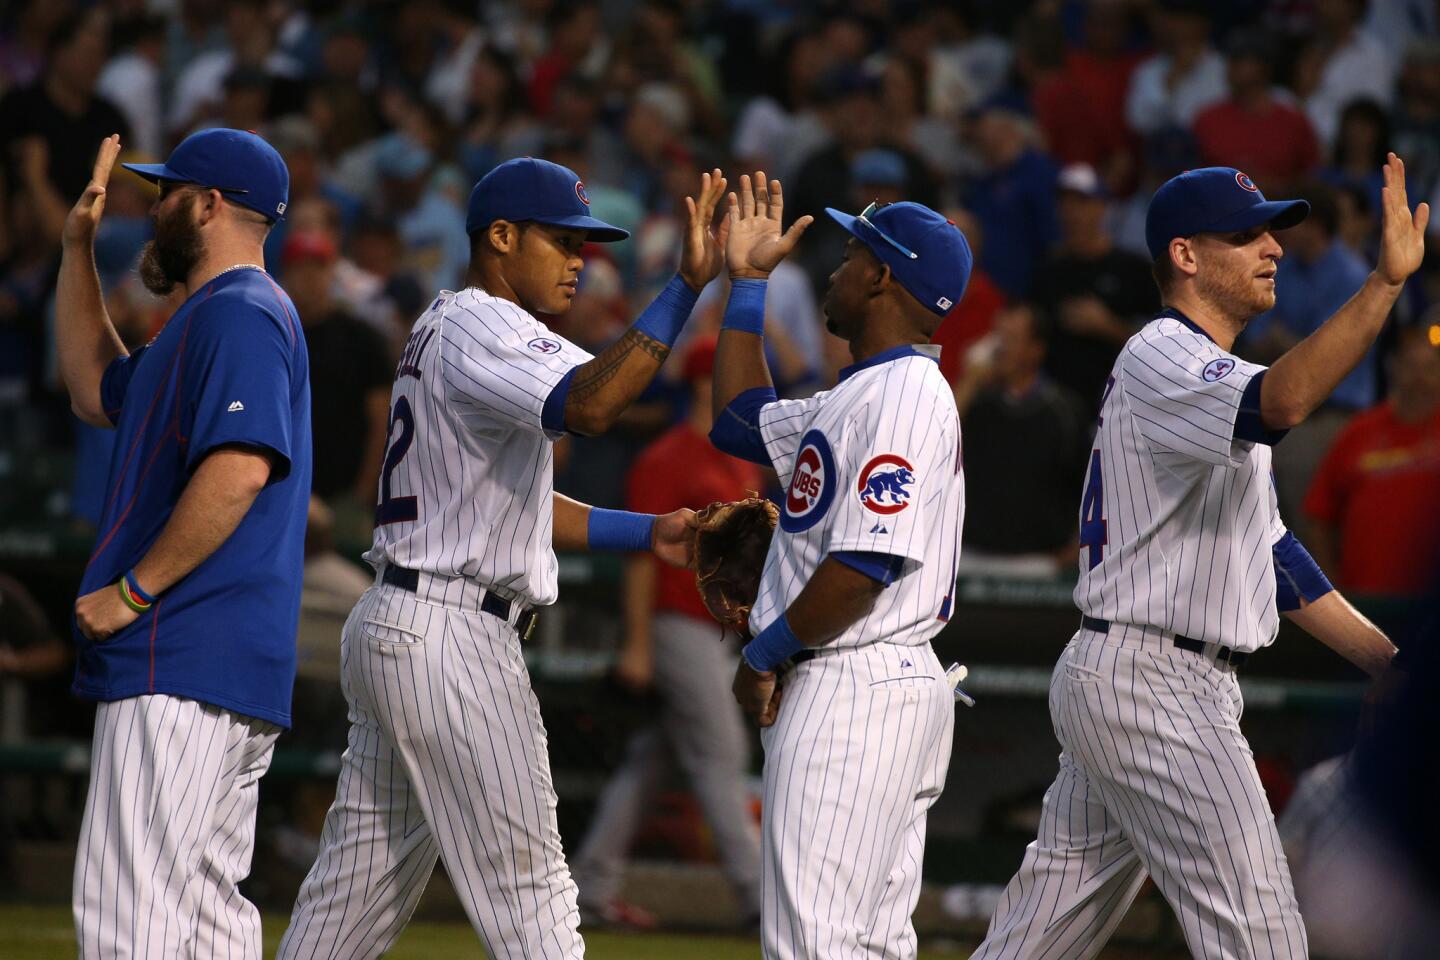 Cubs players congratulate each other after they won the game.